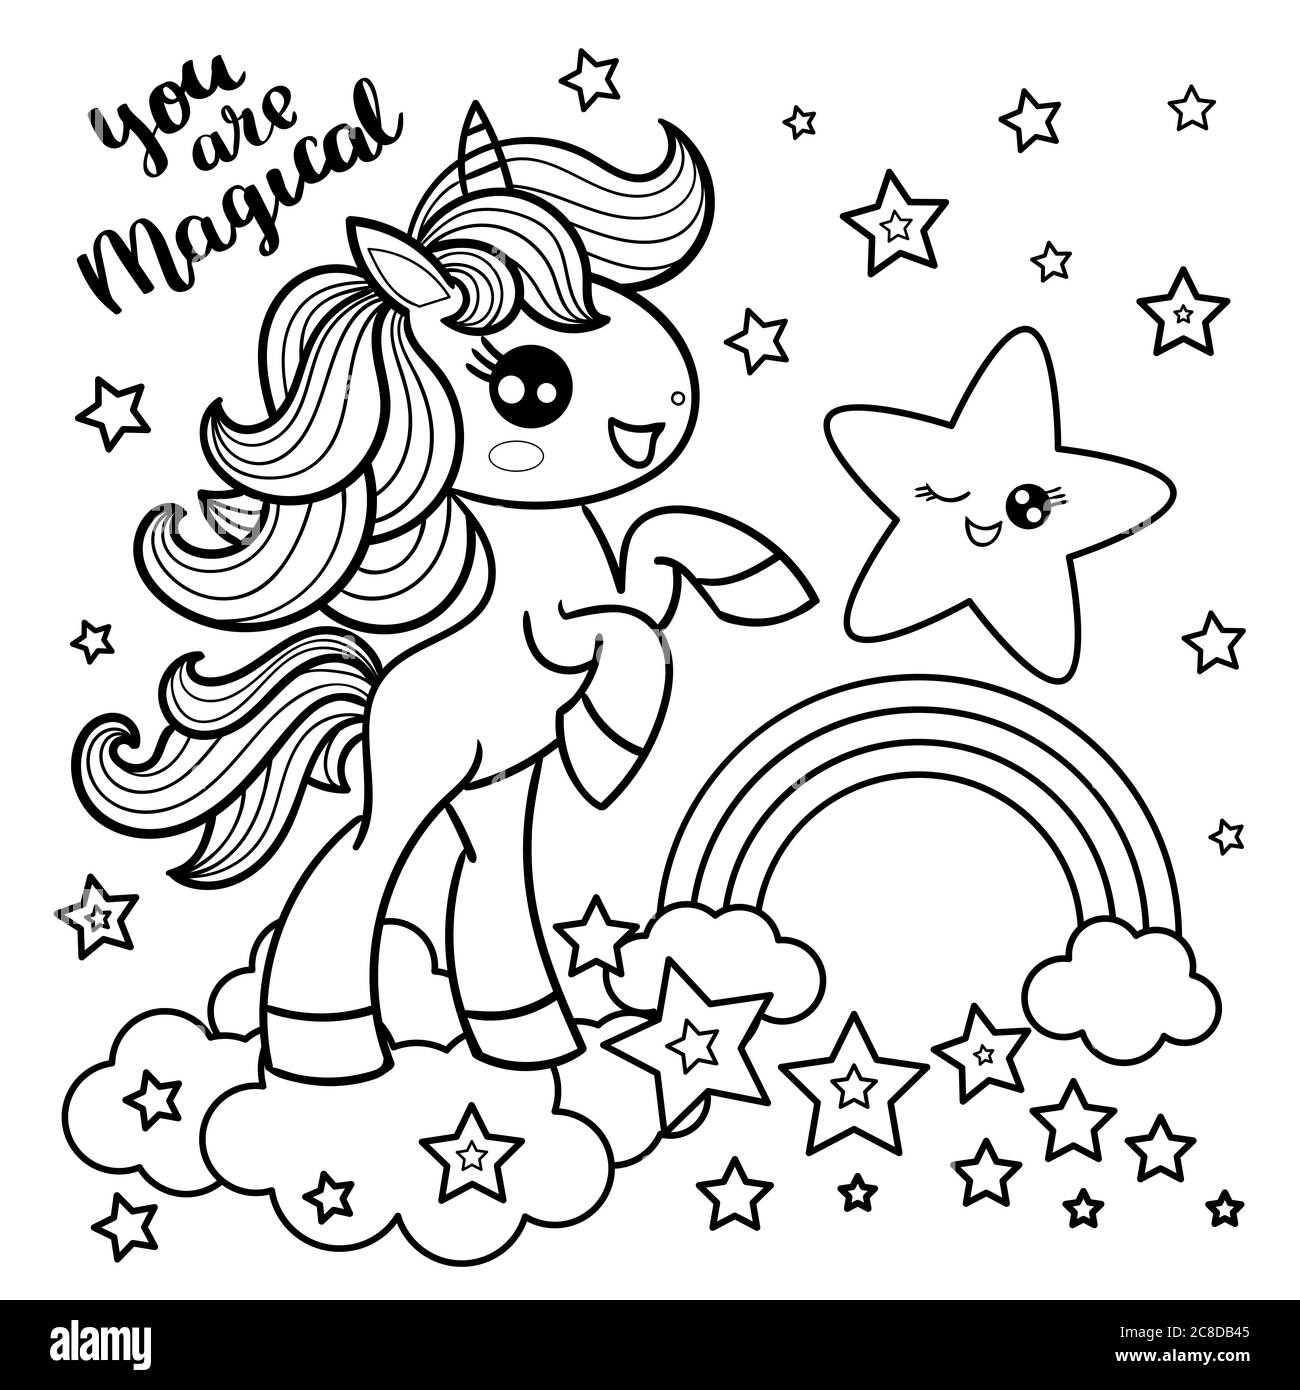 You are magical. Cute, cartoon unicorn with a rainbow and stars. Black and white image. Doodle style. For design of prints, posters, cards, coloring b Stock Vector